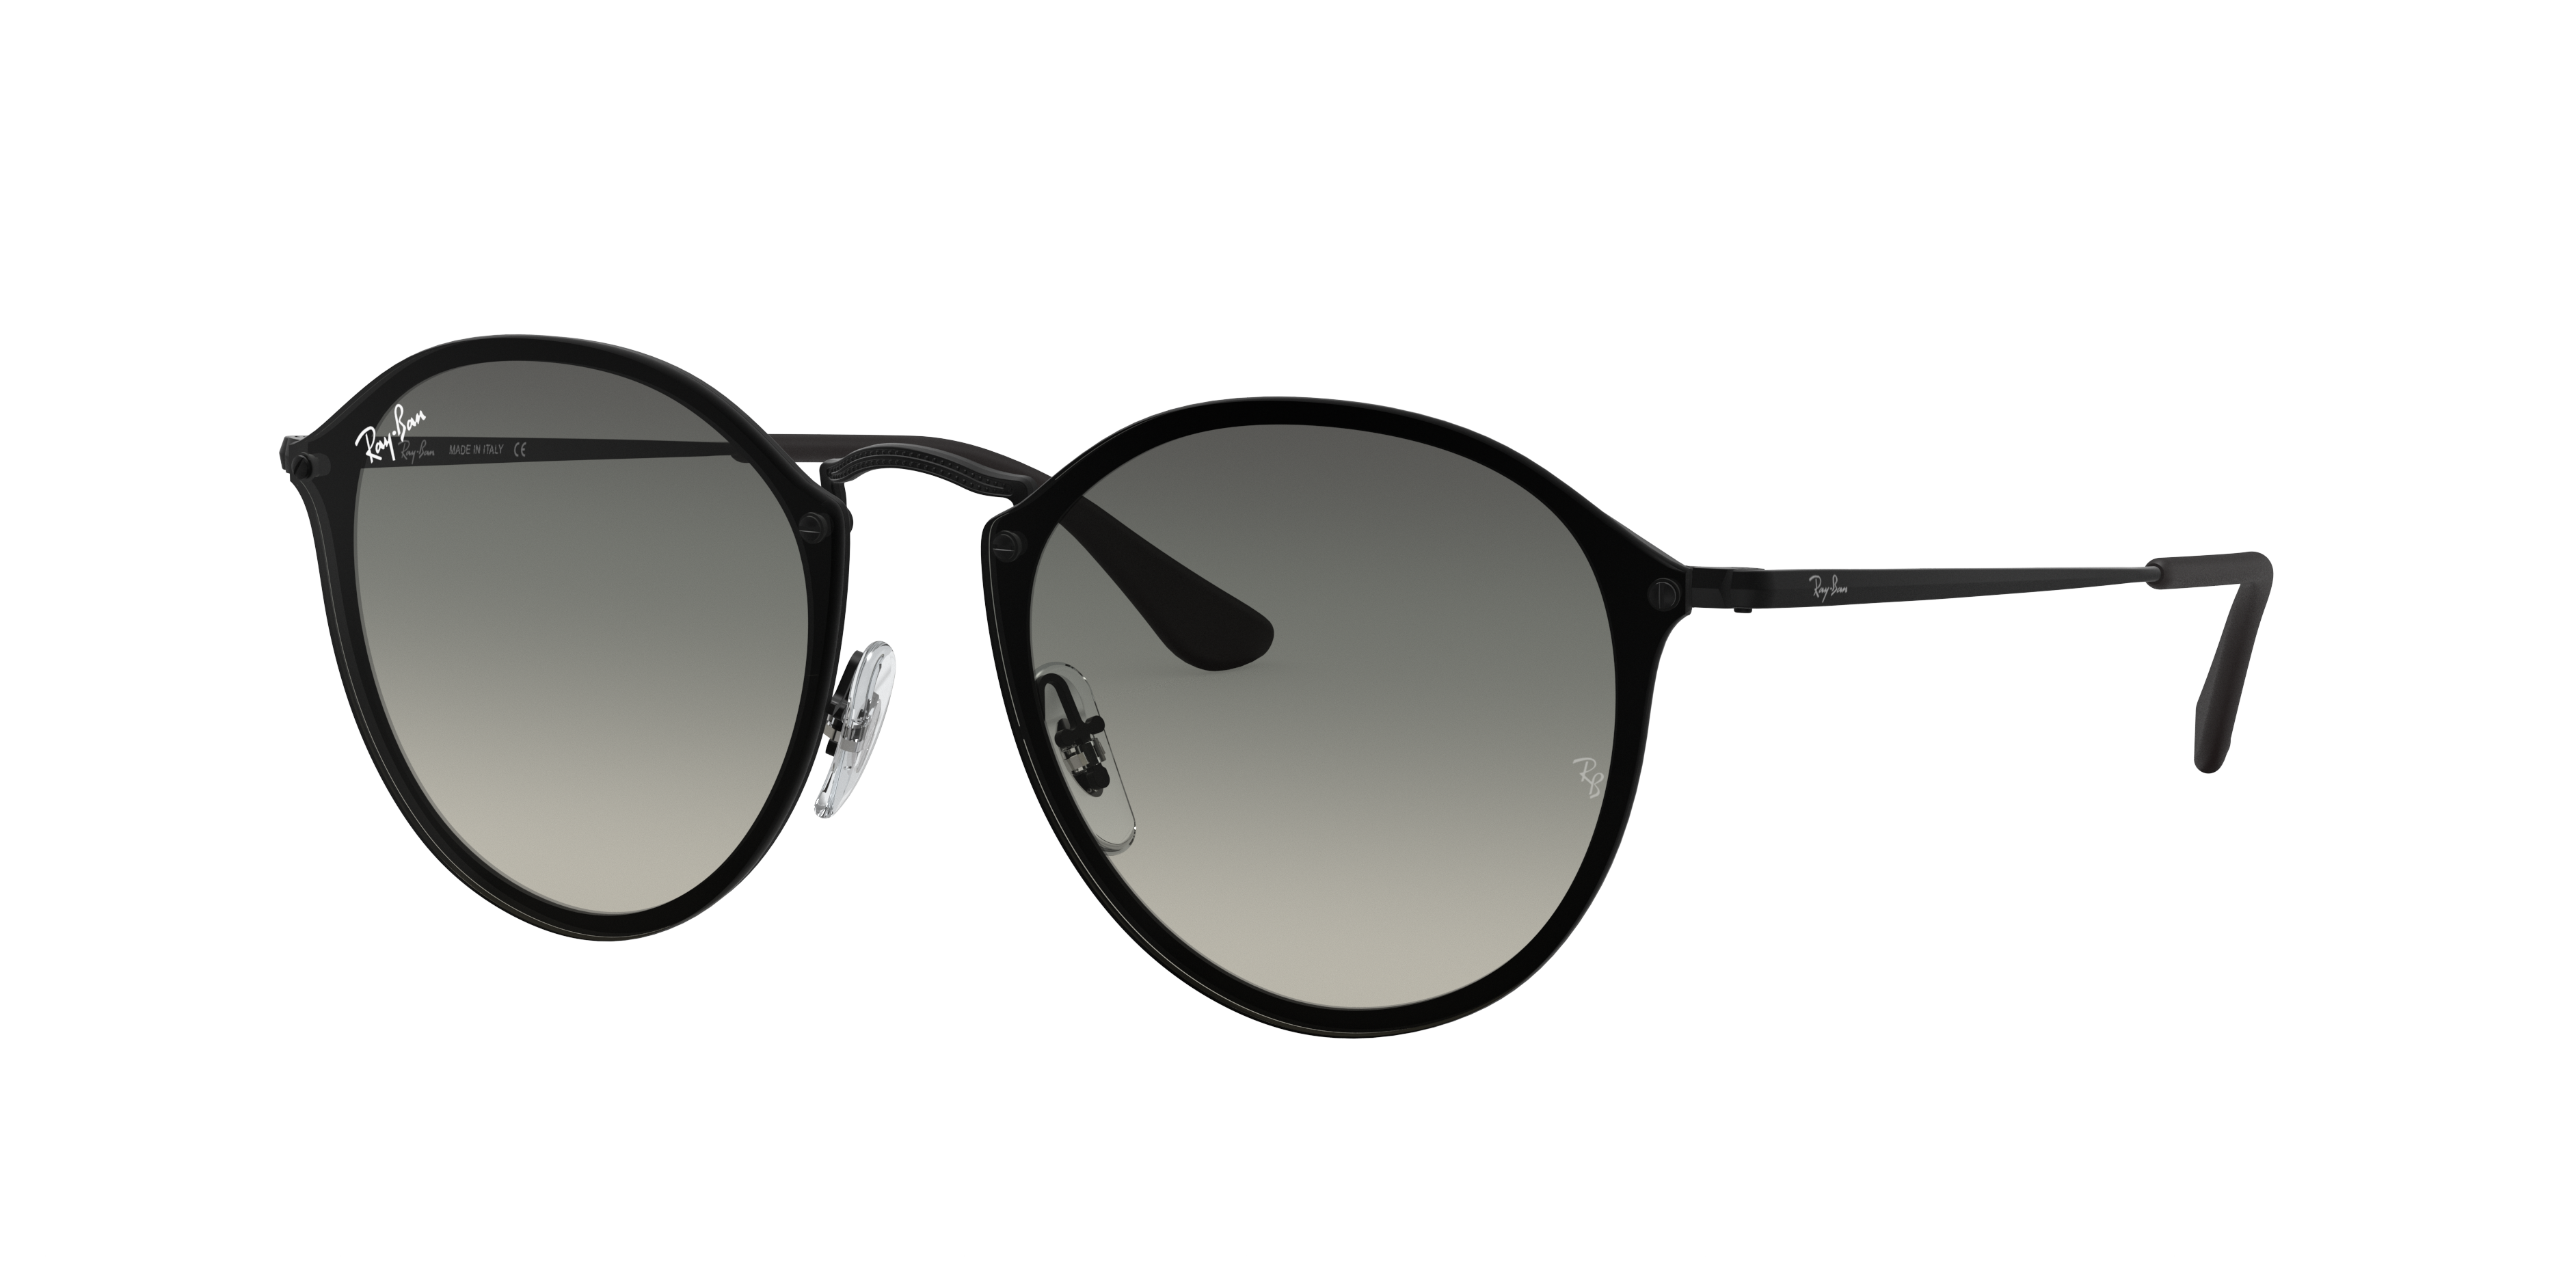 Blaze Round Sunglasses in Black and Grey | Ray-Ban®